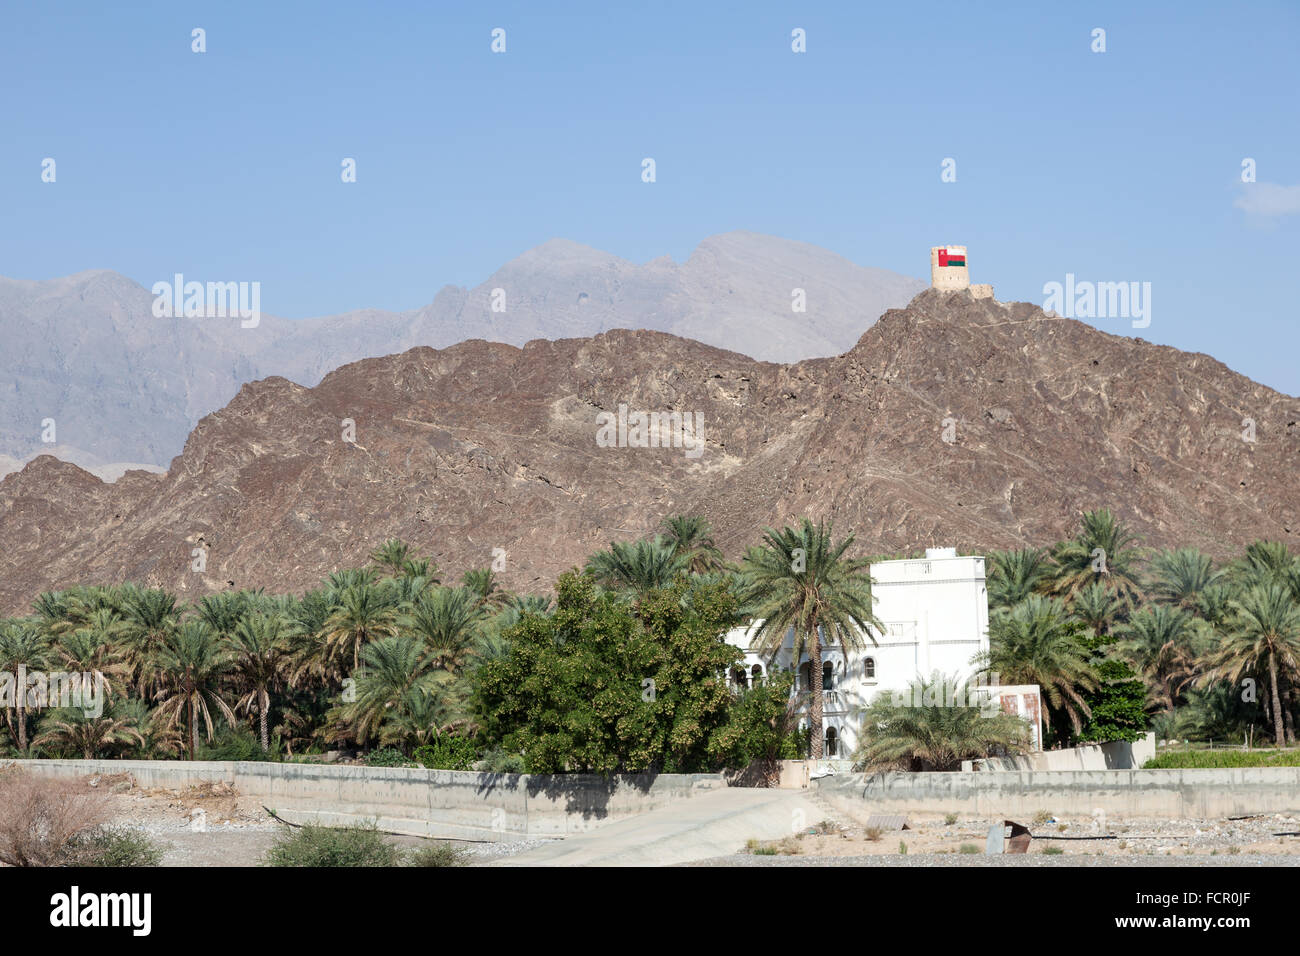 The Hajjar mountains rise behind an oasis with palm trees in Oman, Middle East Stock Photo